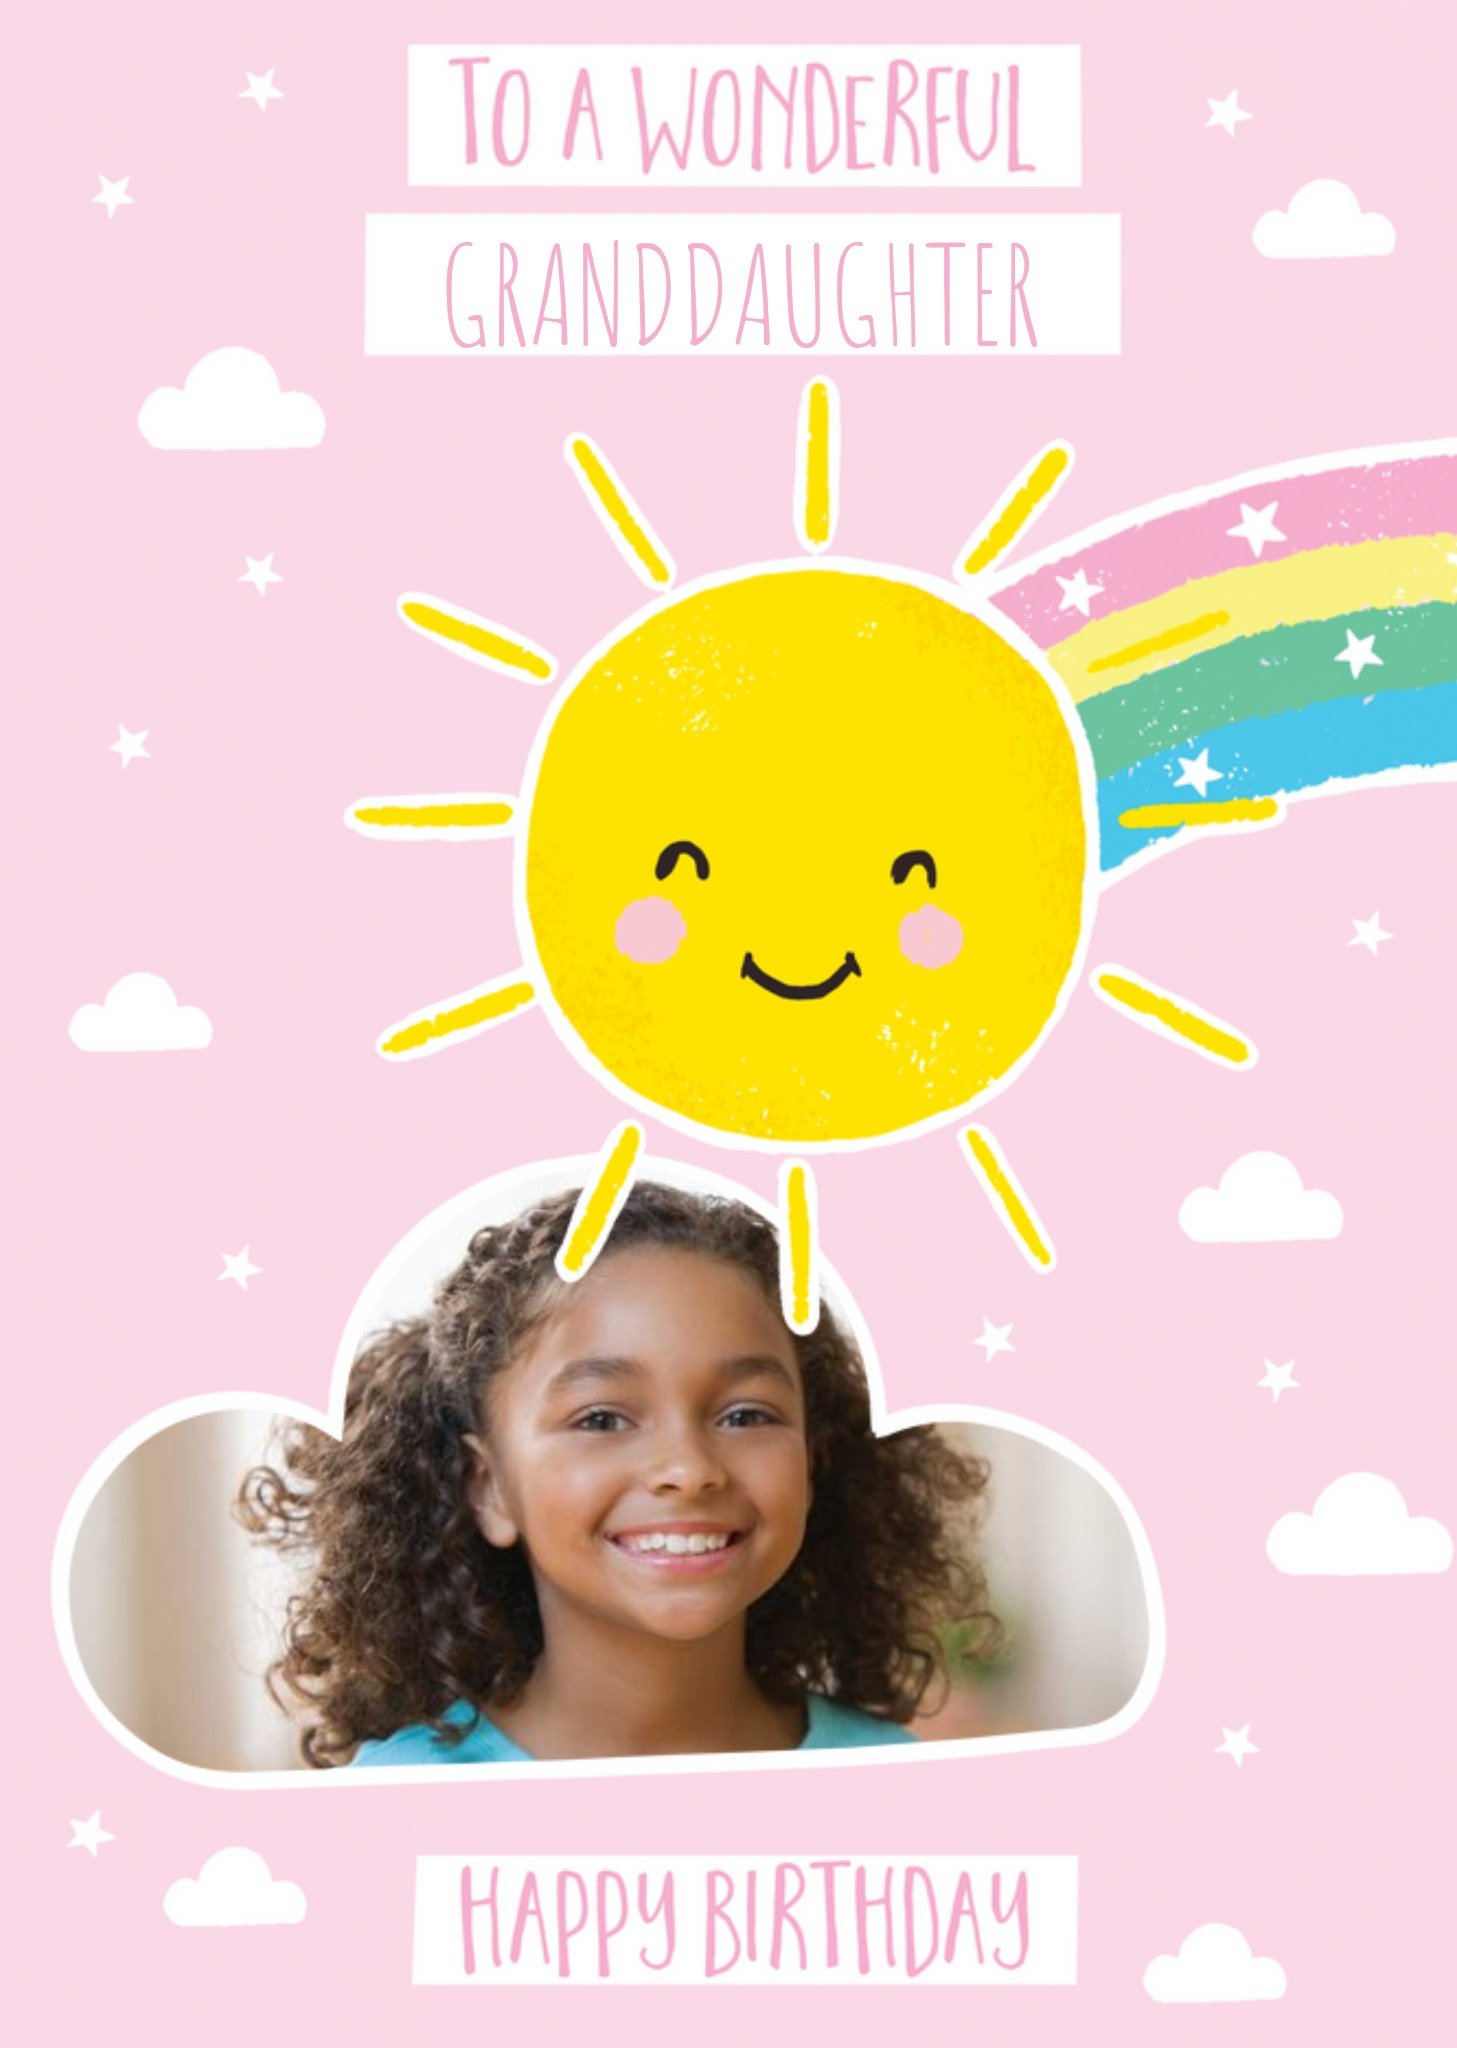 Moonpig Illustration Of The Sun And A Cloud Shaped Photo Frame Granddaughter's Photo Upload Birthday